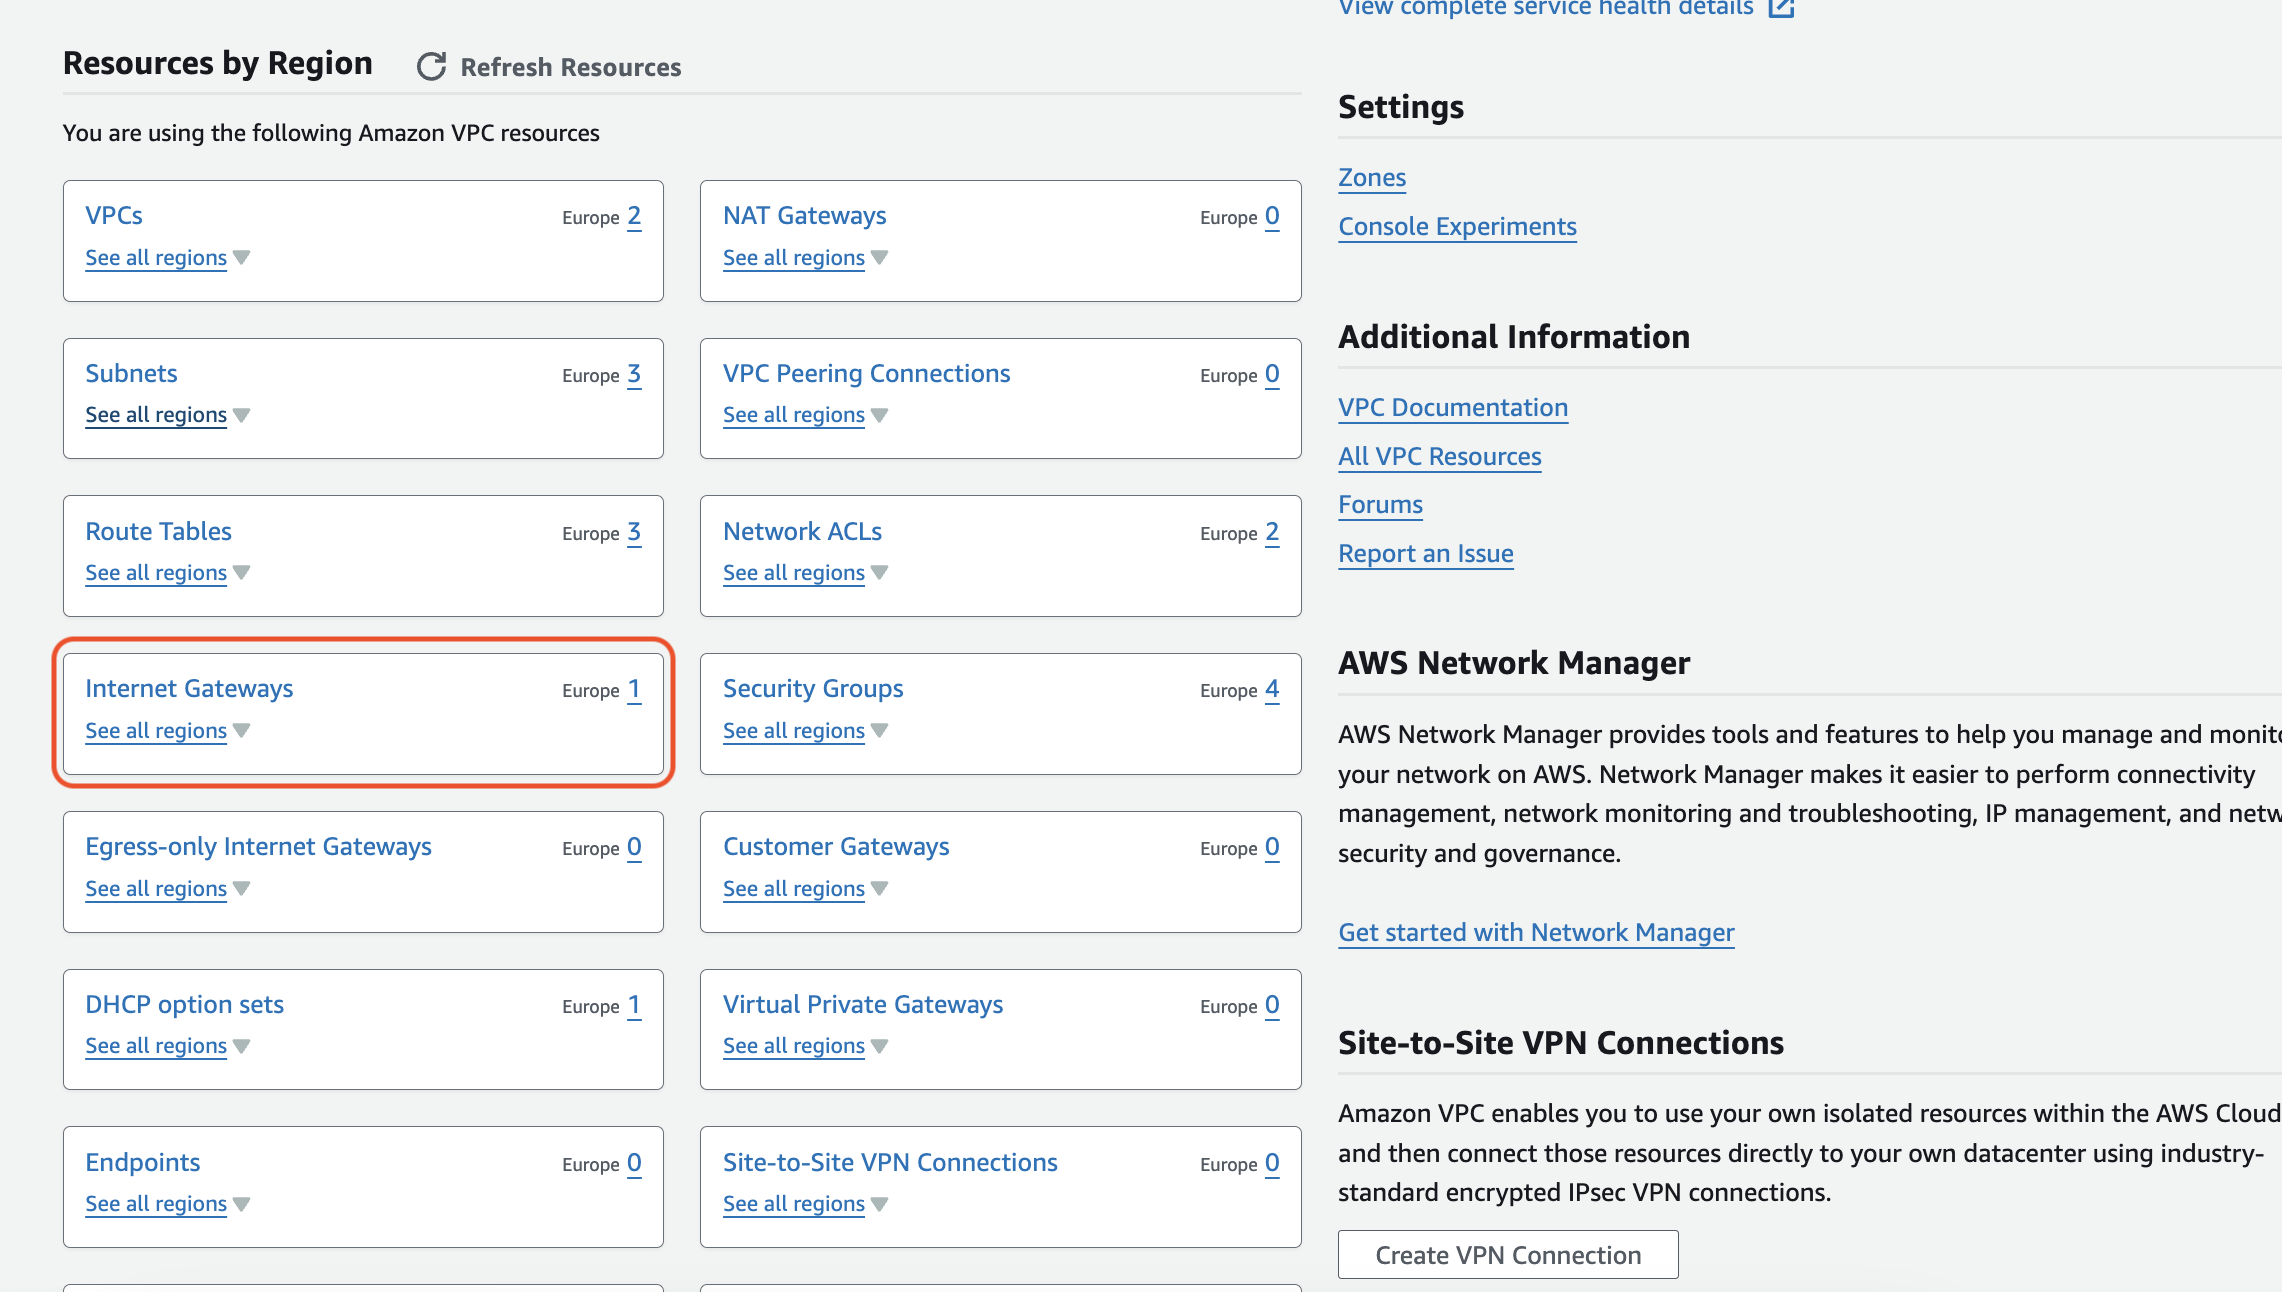 navigate to the "Internet Gateways" section within the VPC dashboard